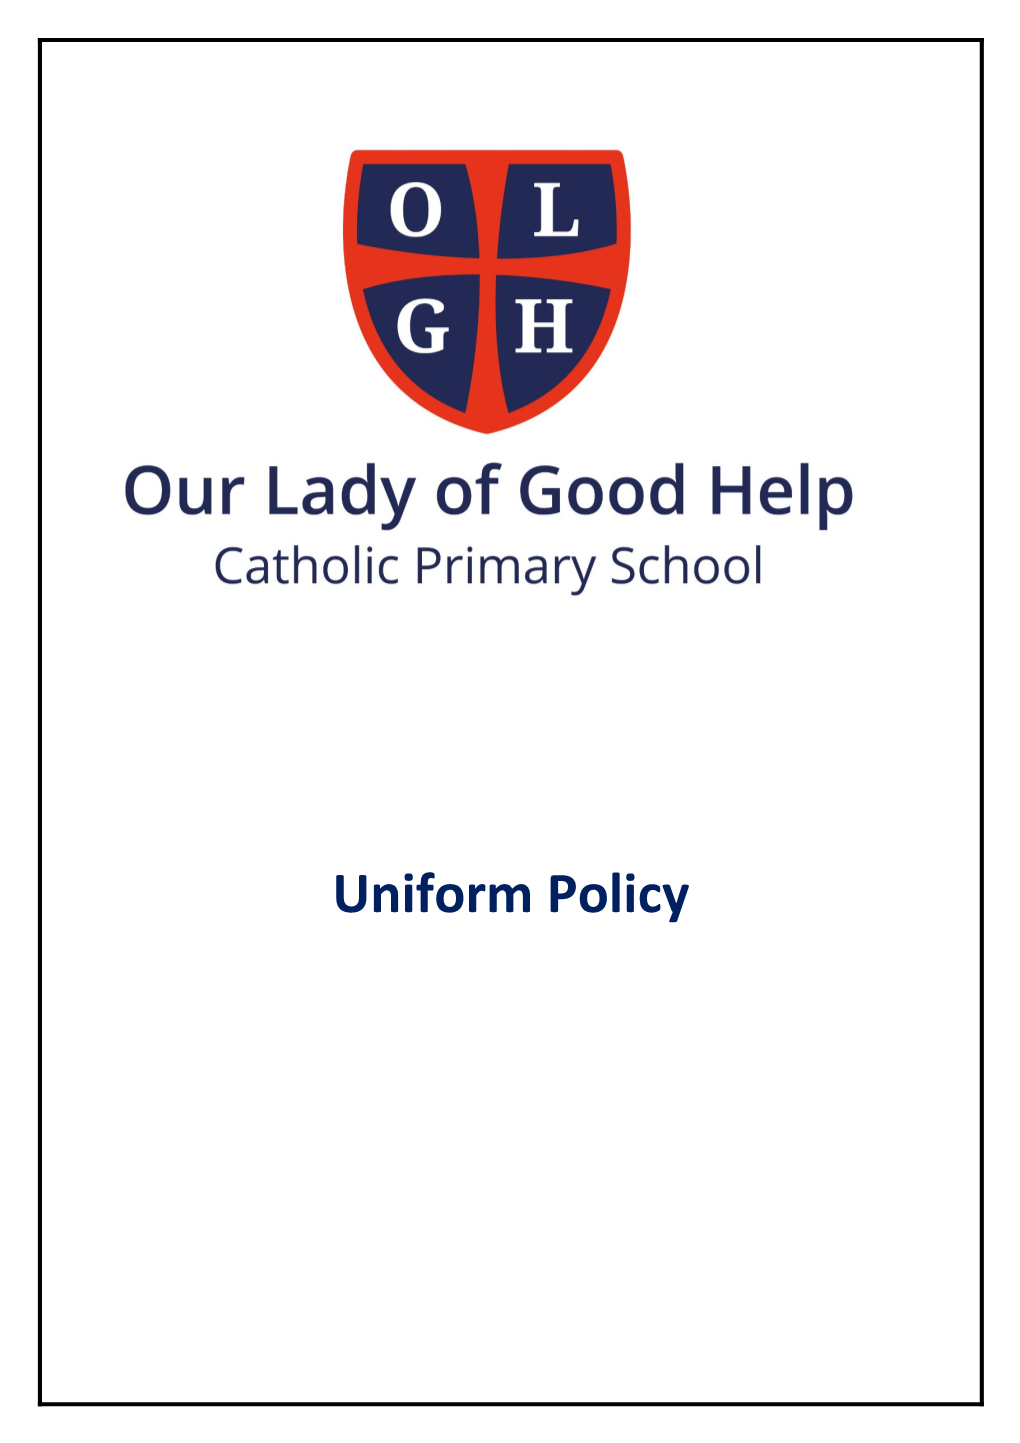 At Our Lady of Good Help We Take Great Pride in Our Uniform